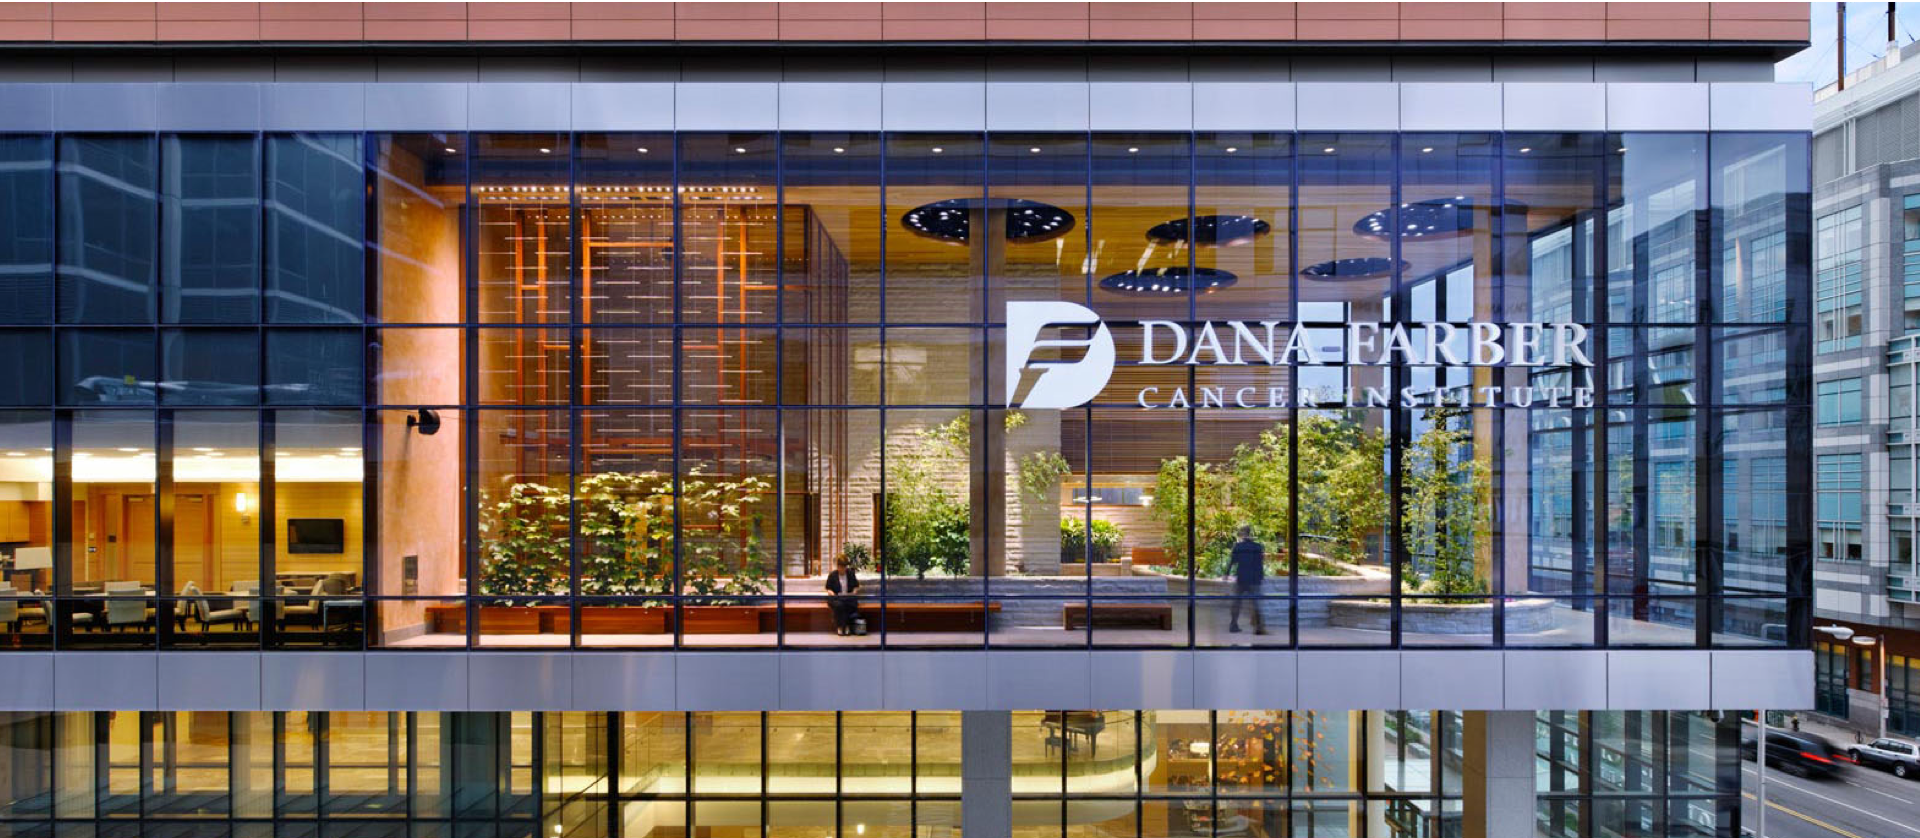 A view of the Dana-Farber / Harvard Cancer Center building.